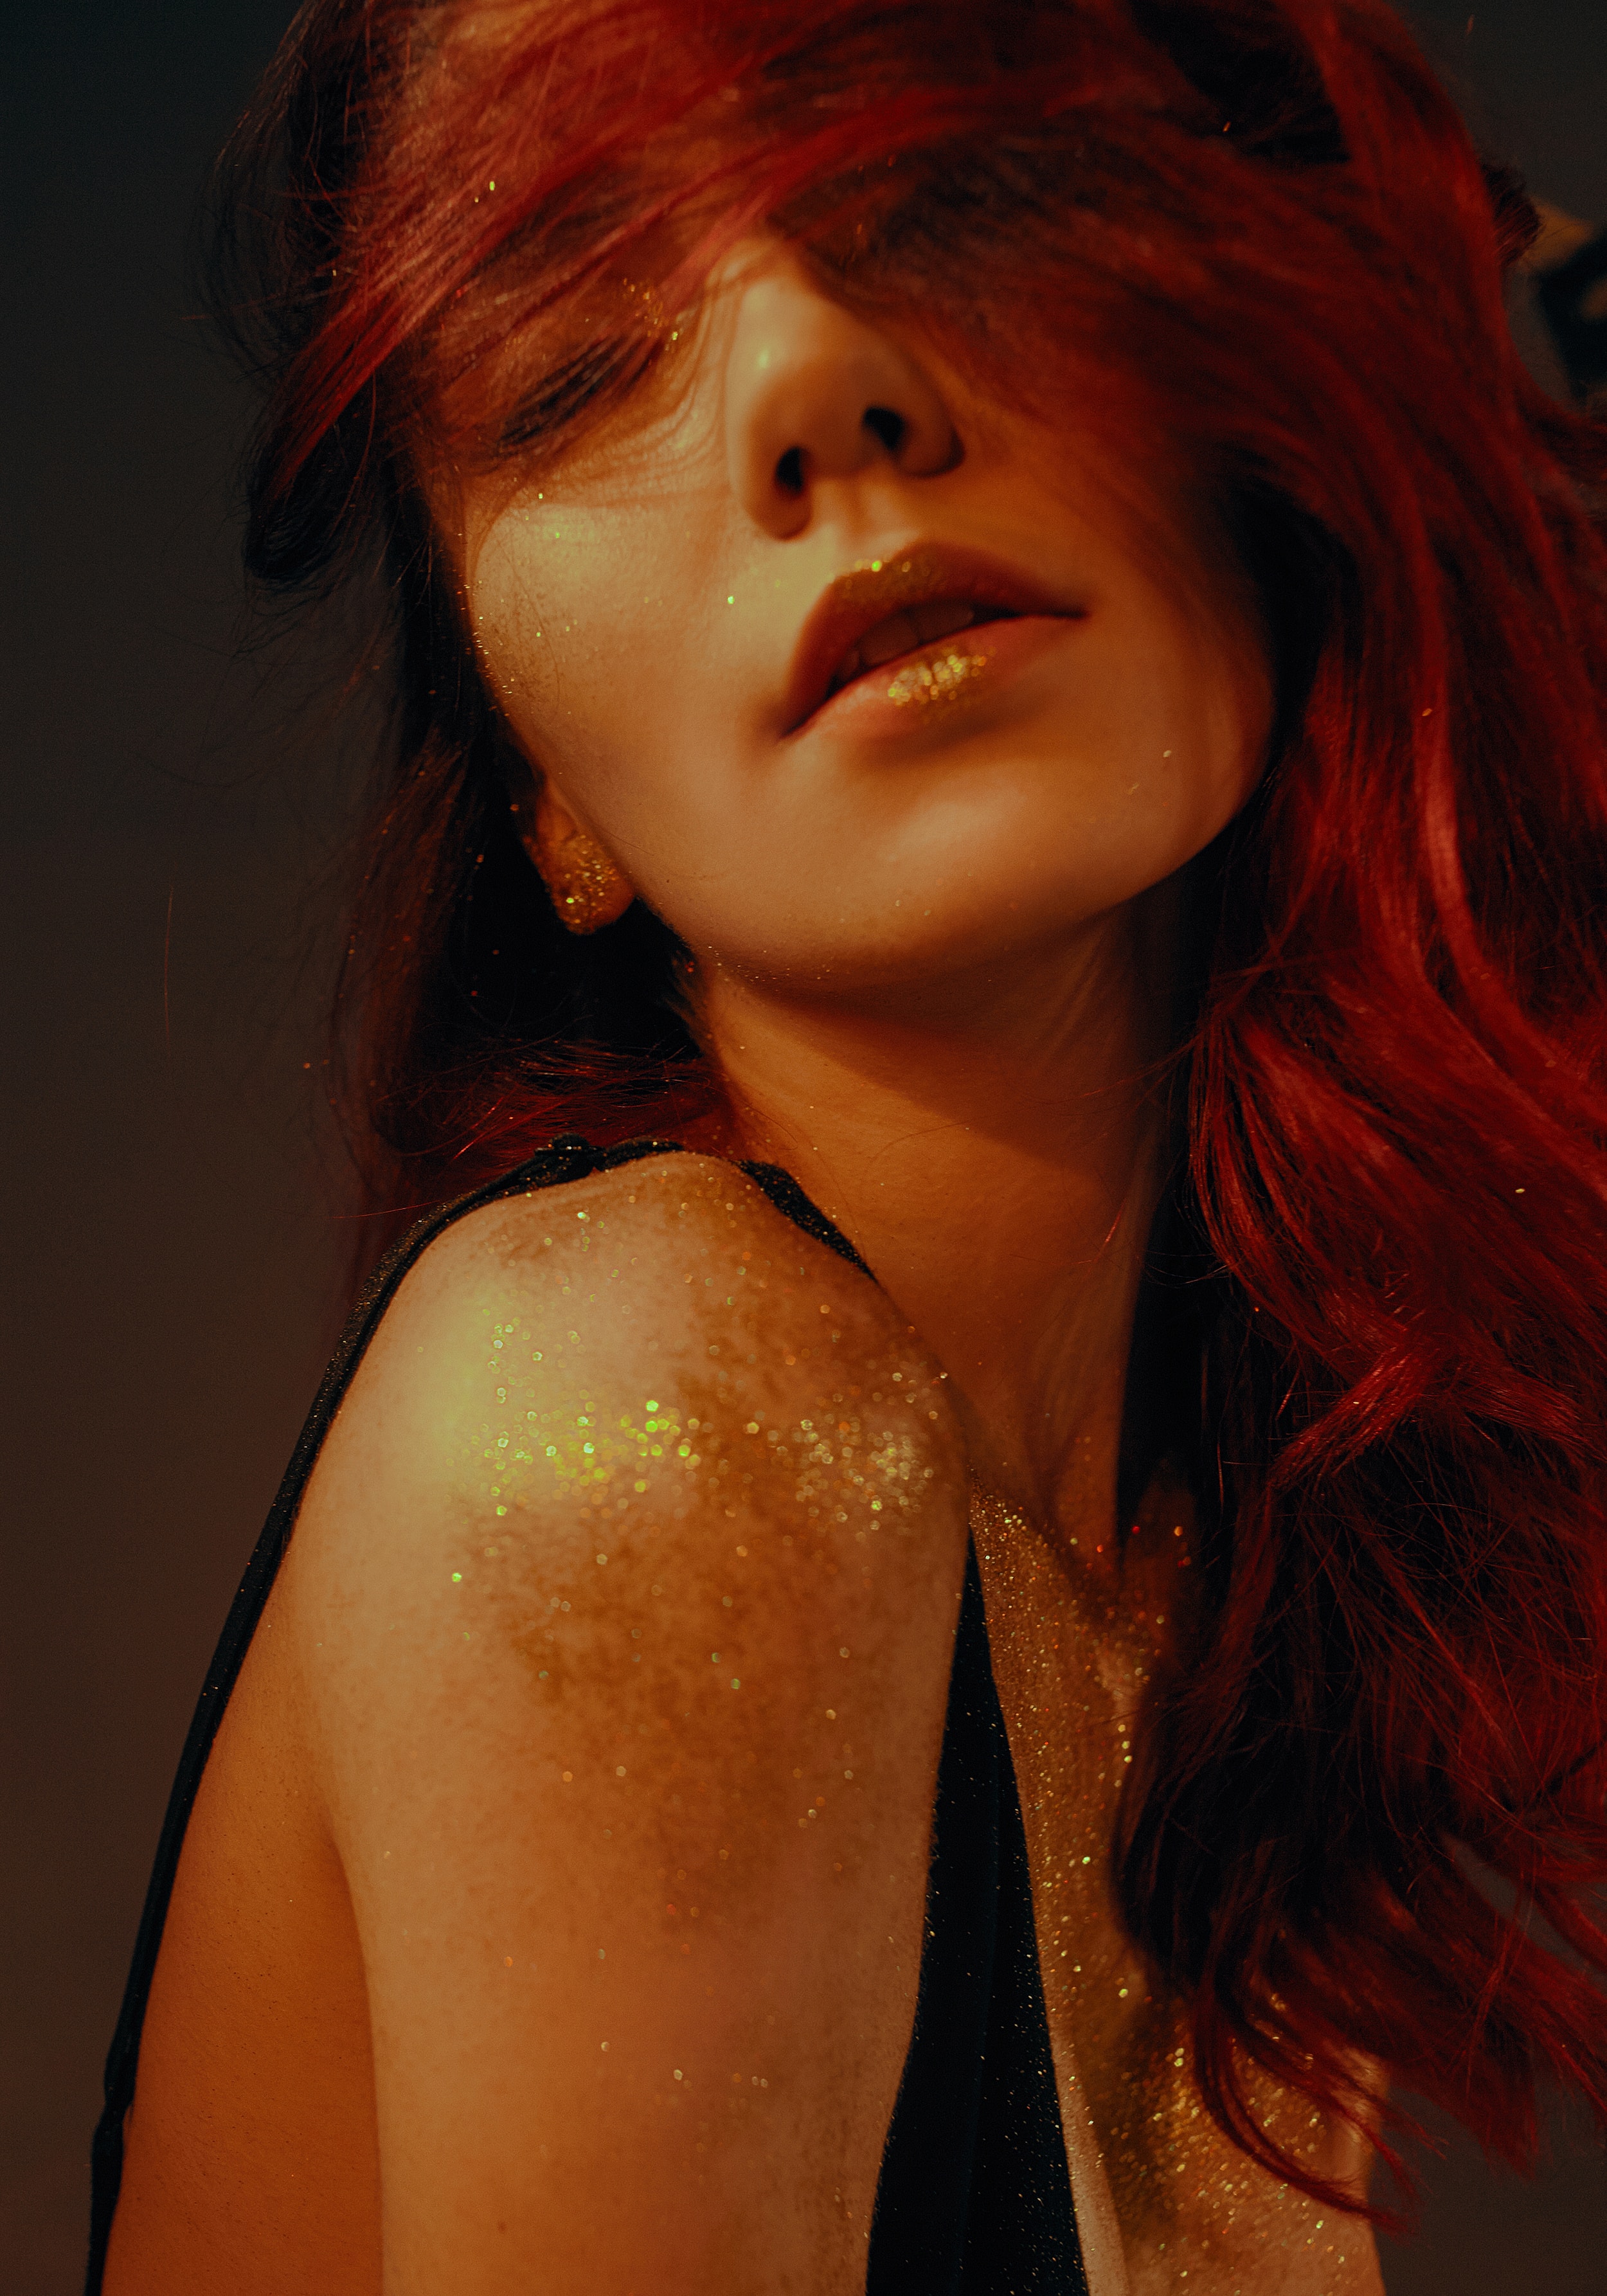 A woman with glitter on her face. | Source: Unsplash